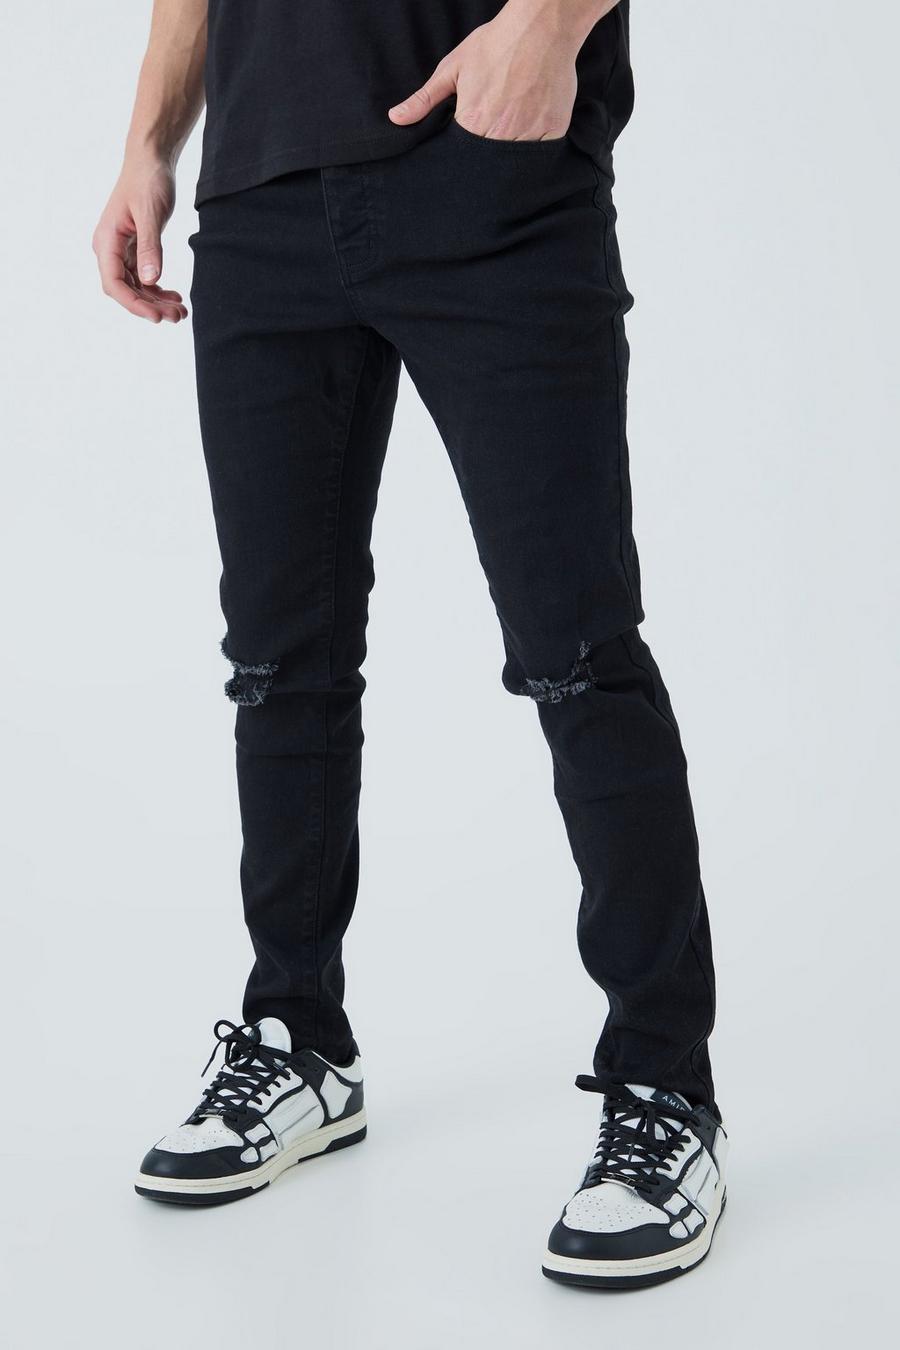 Black Skinny Jeans With Ripped Knees image number 1